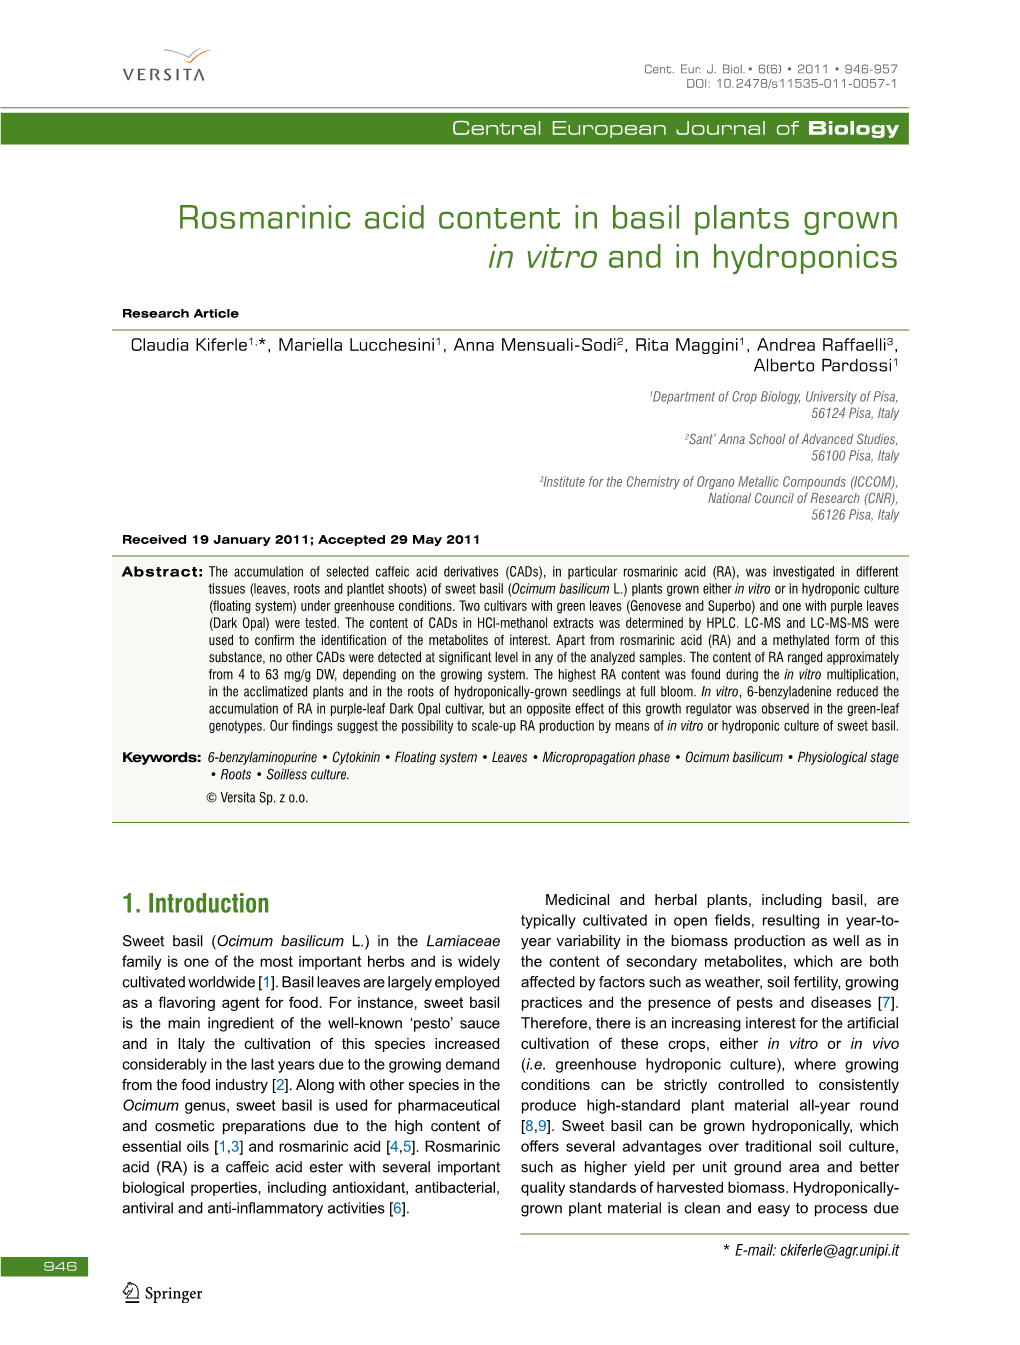 Rosmarinic Acid Content in Basil Plants Grown in Vitro and in Hydroponics